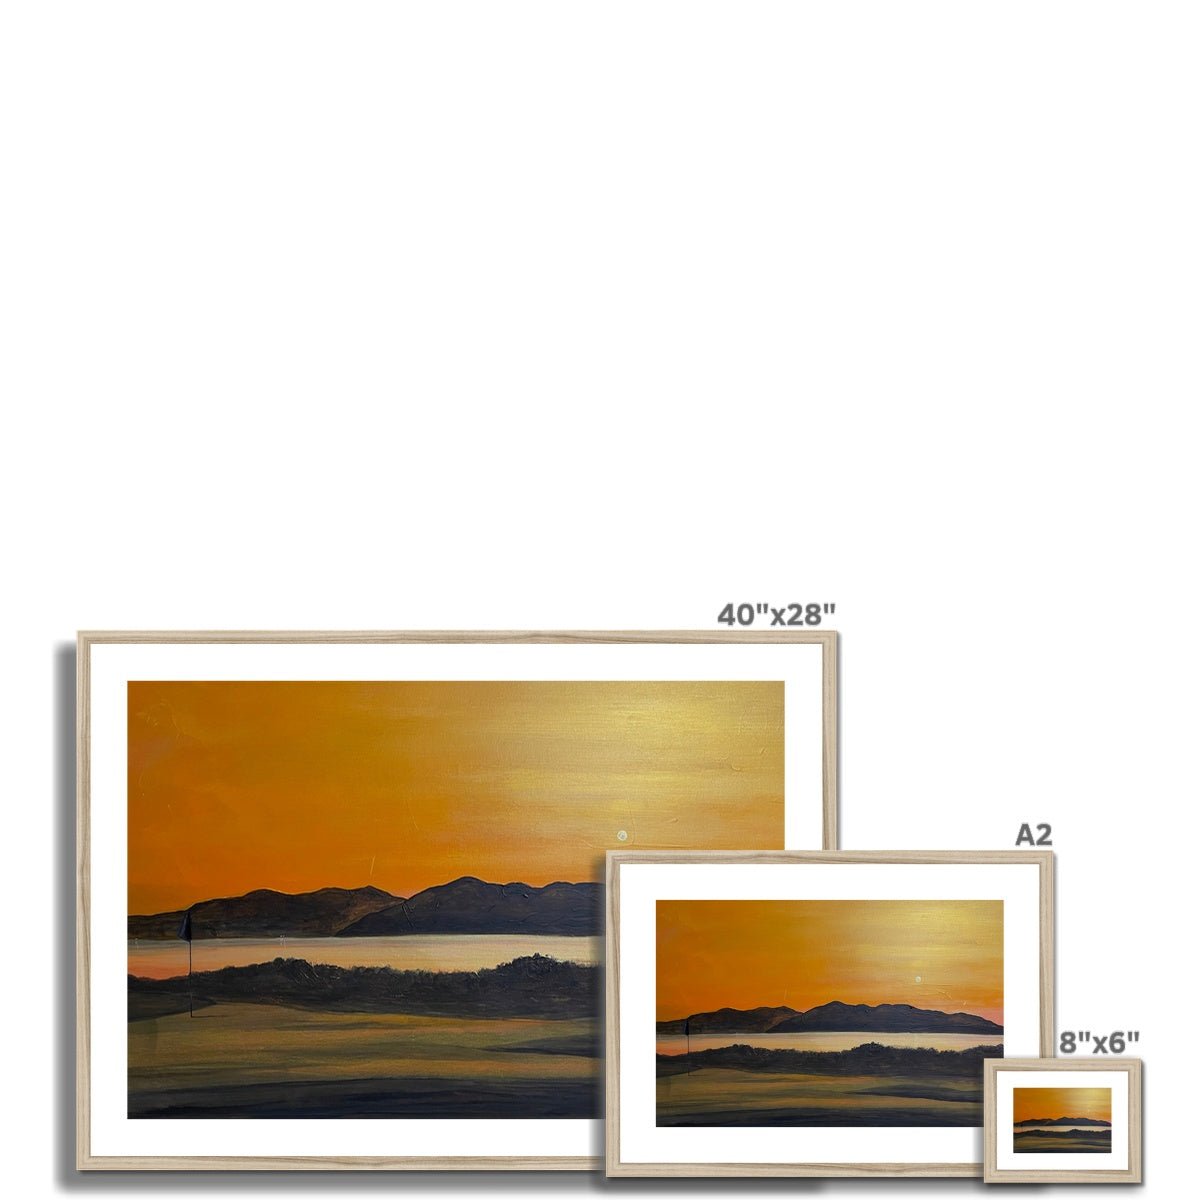 Arran & The 5th Green Royal Troon Golf Course Painting | Framed & Mounted Prints From Scotland-Framed & Mounted Prints-Arran Art Gallery-Paintings, Prints, Homeware, Art Gifts From Scotland By Scottish Artist Kevin Hunter